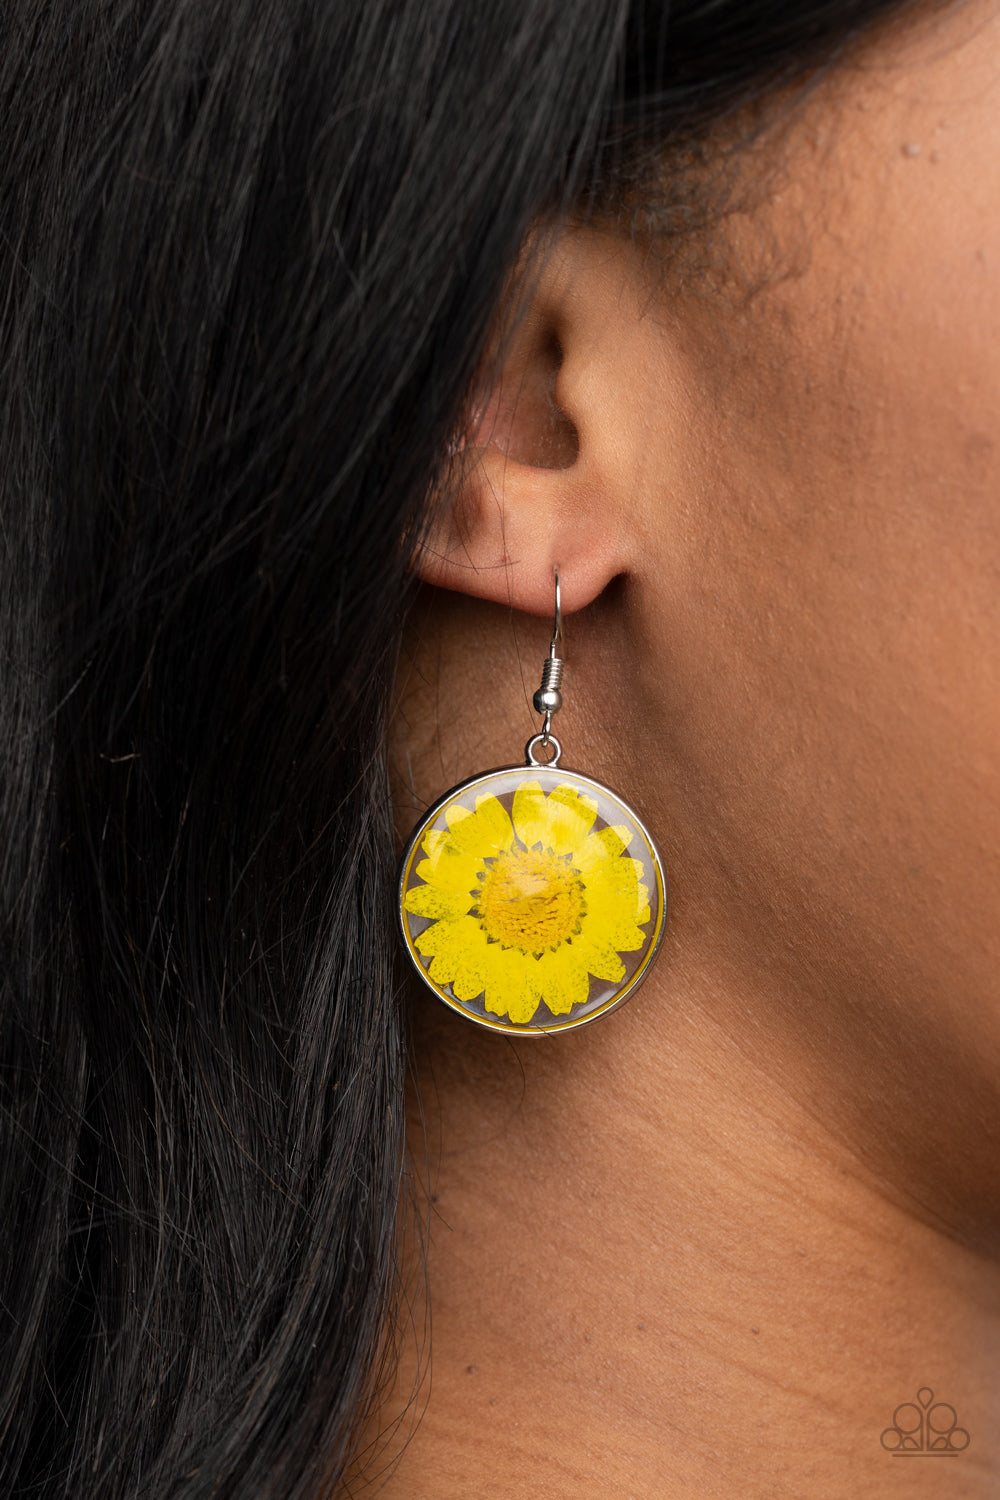 FOREVER FLORALS - YELLOW PRESSED FLOWER EARRINGS